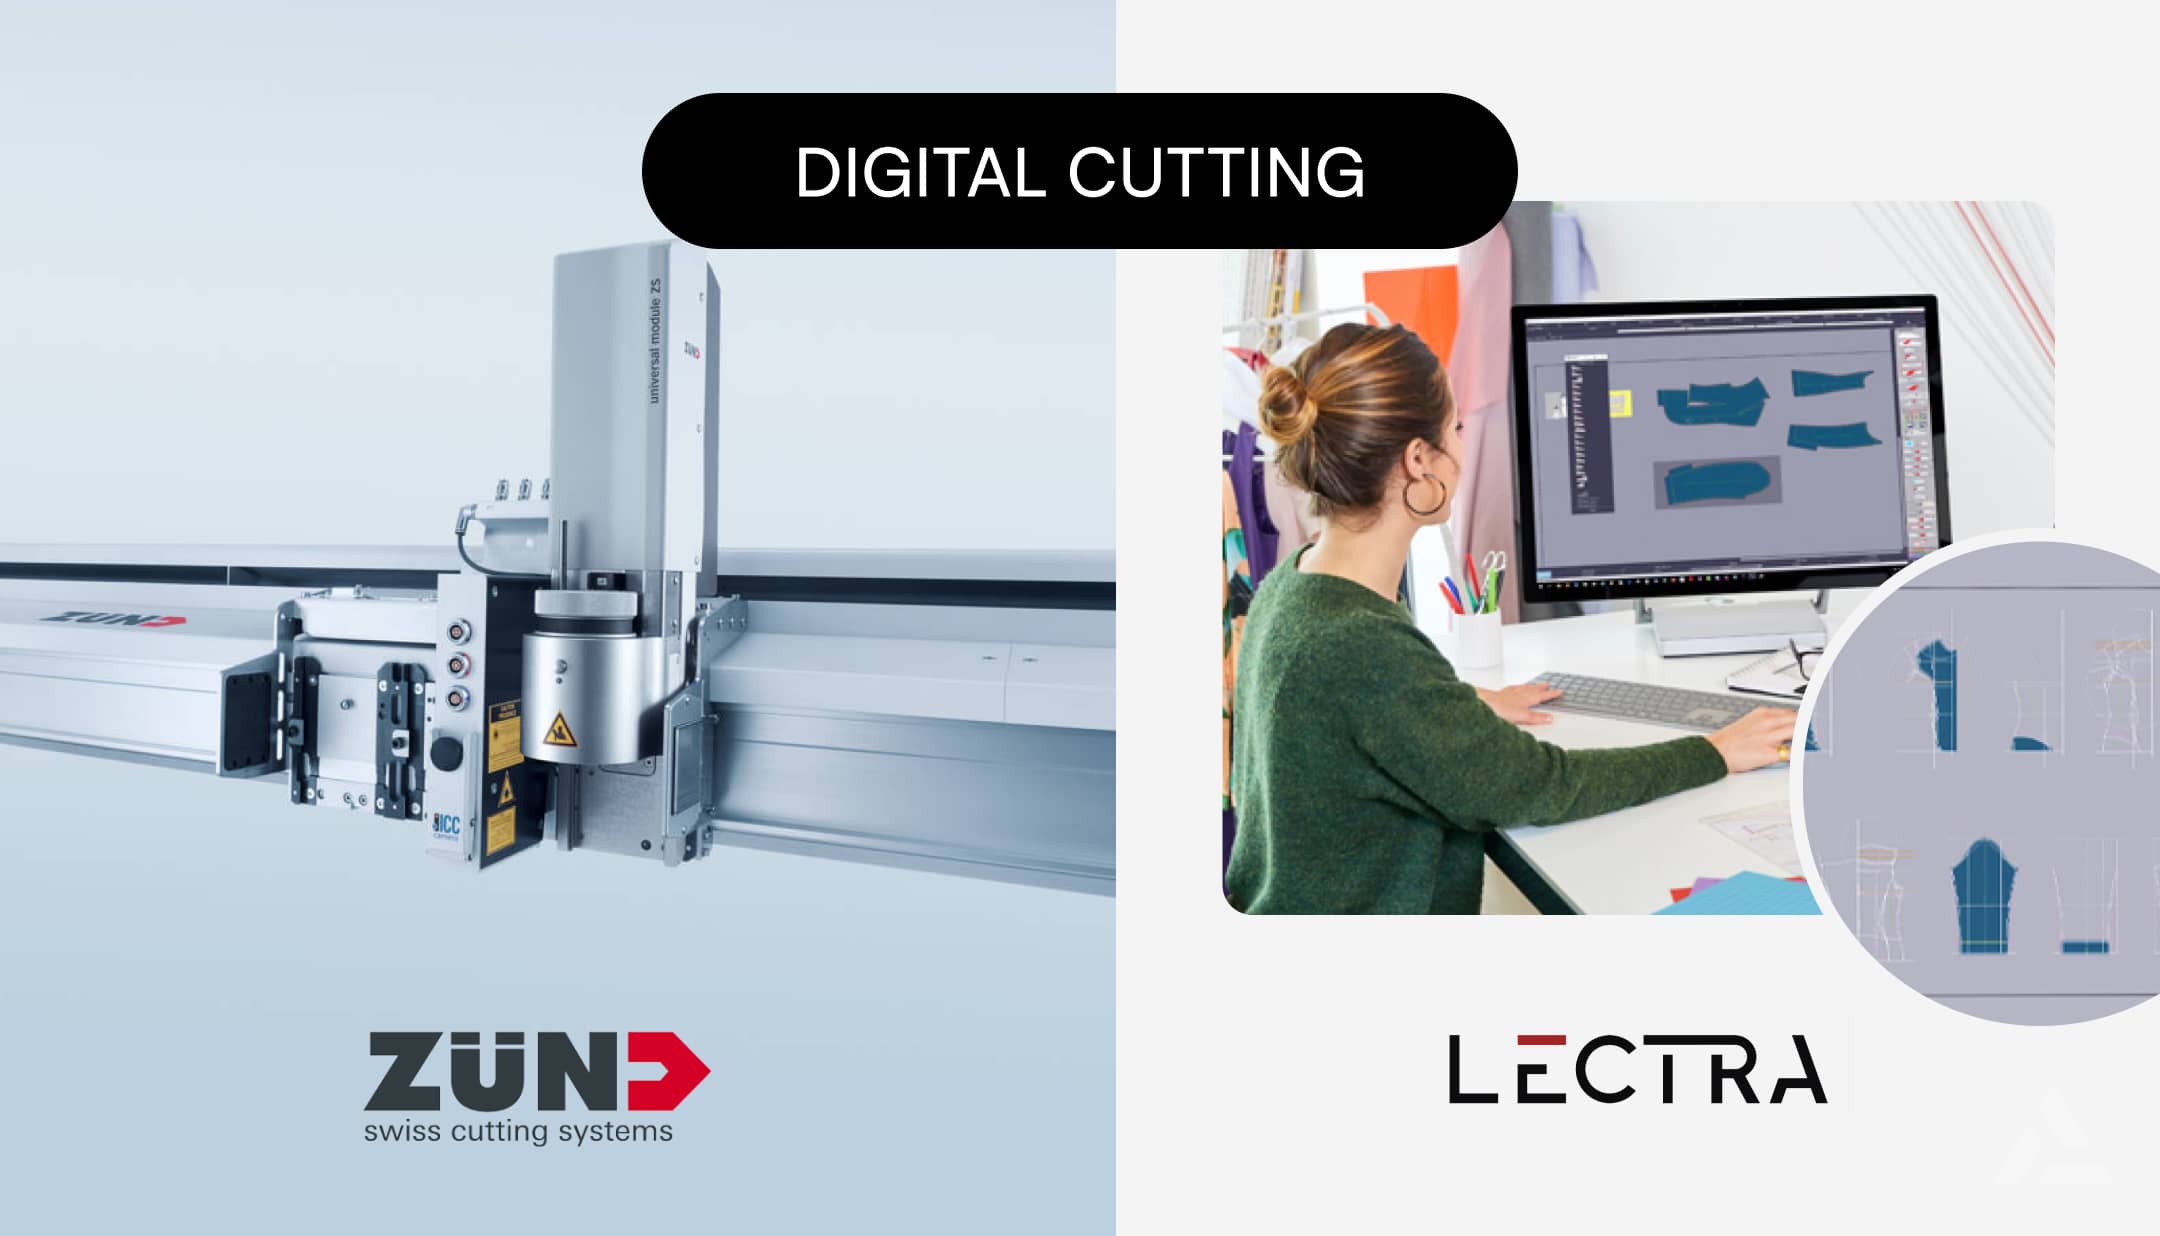 Split image featuring a digital fabric cutting machine on the left and a woman using design software on the right, both highlighting textile technology in the fashion industry tech.